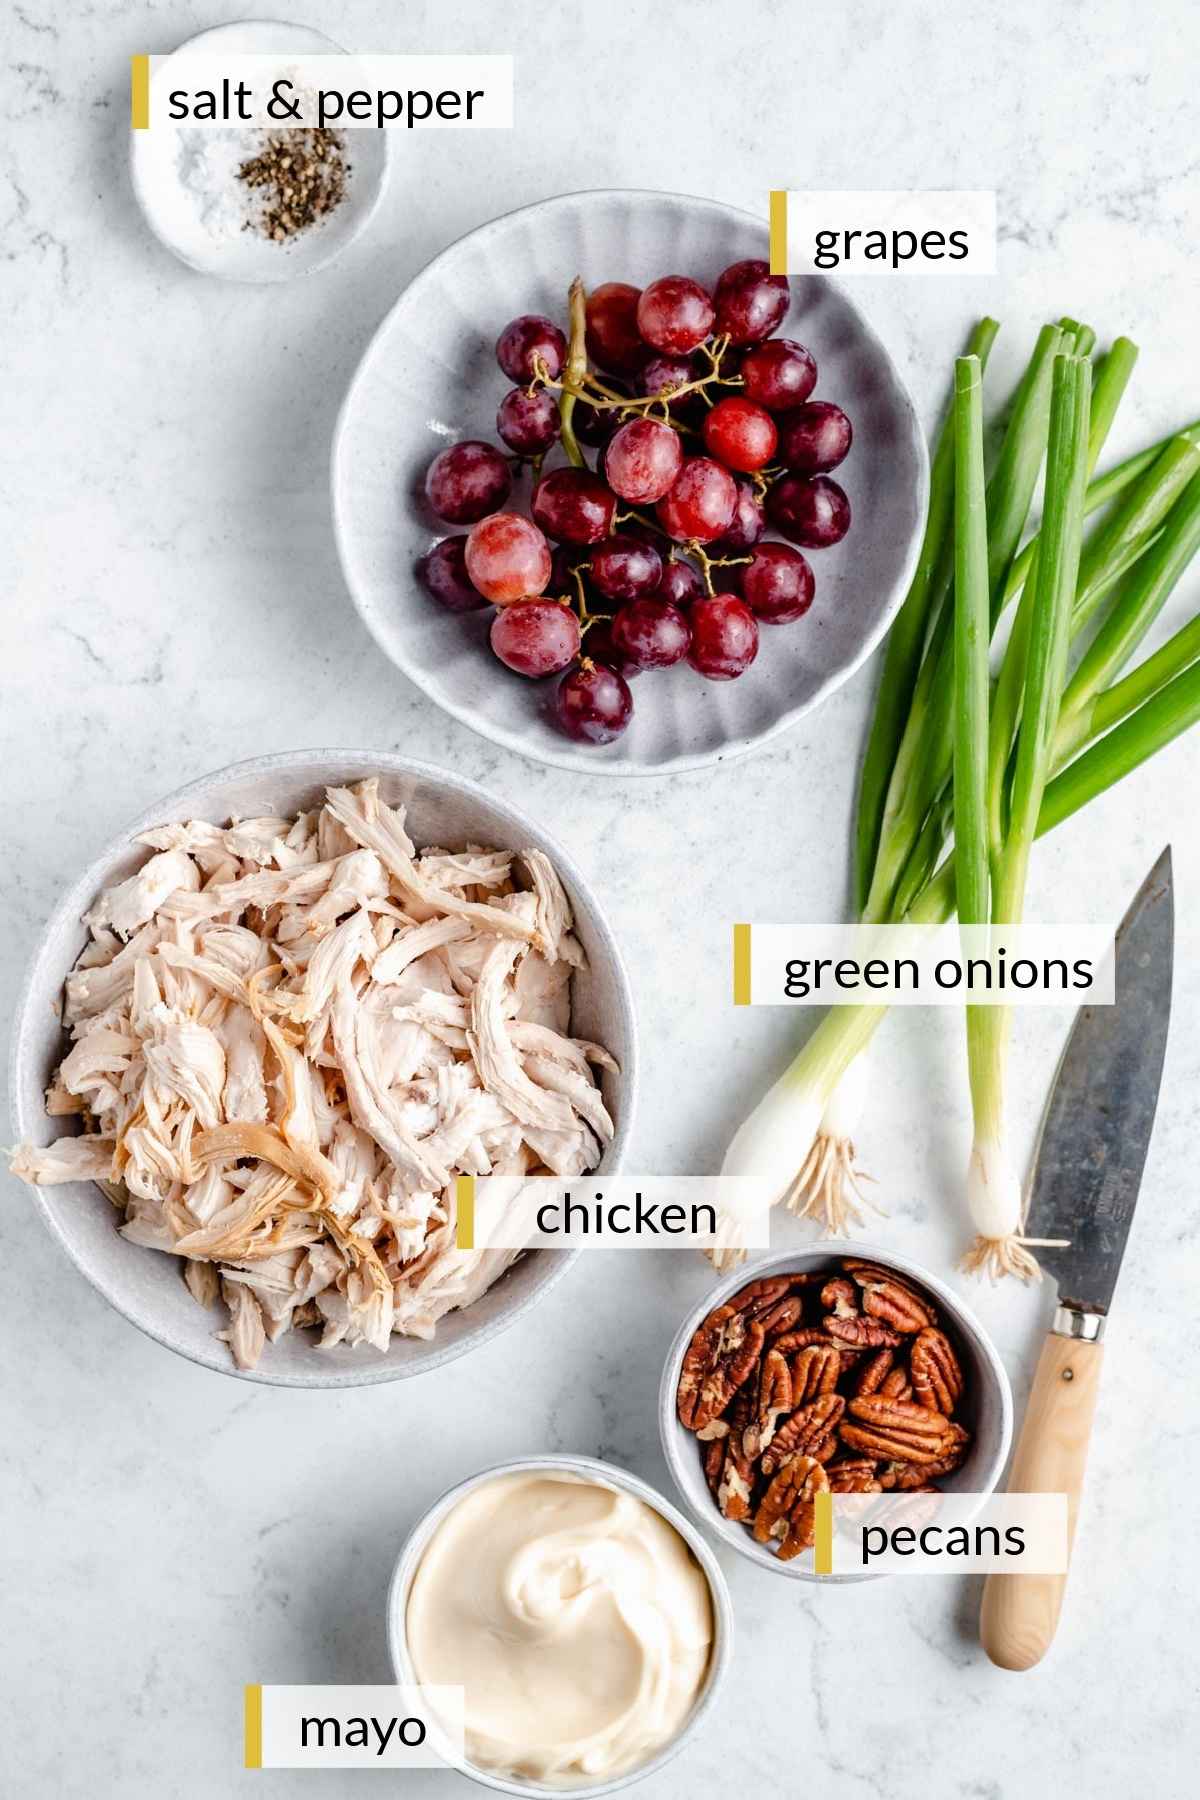 Shredded chicken, grapes, pecans and mayo divided into small bowls.